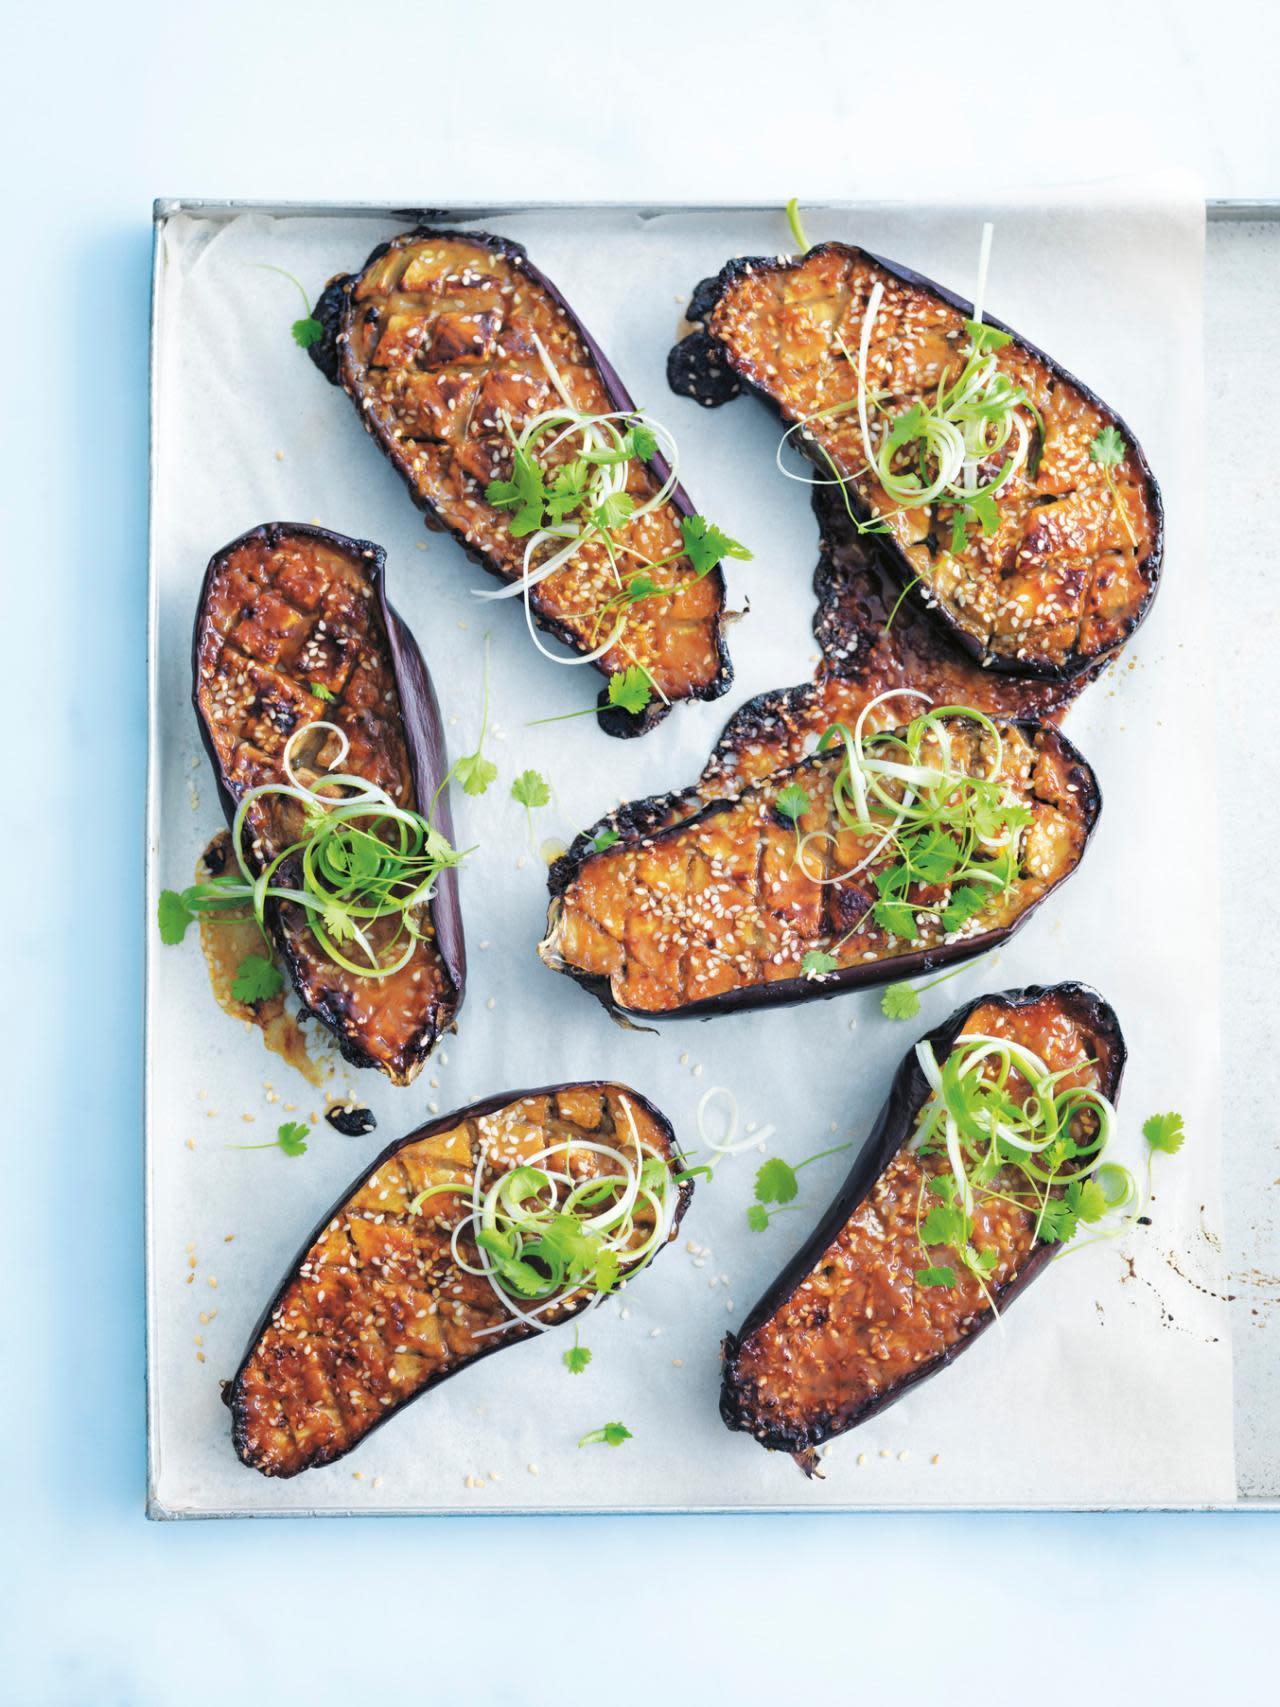 Miso-Roasted Eggplant from ‘The New Easy’